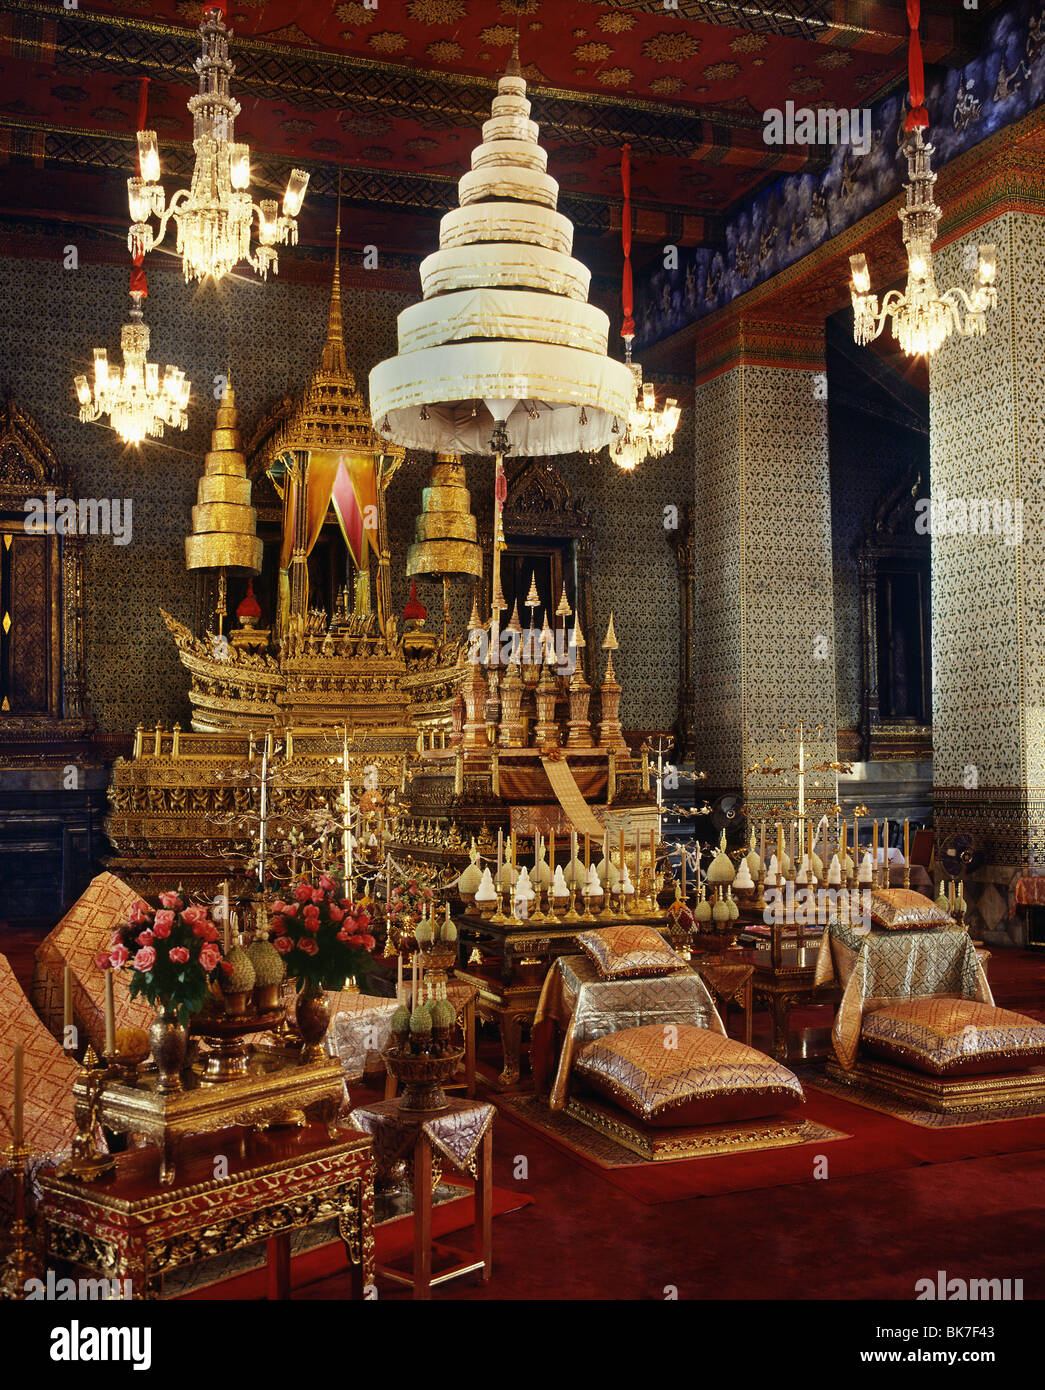 Urns containing ashes of past Kings, Royal Palace, Bangkok, Thailand, Southeast Asia, Asia Stock Photo